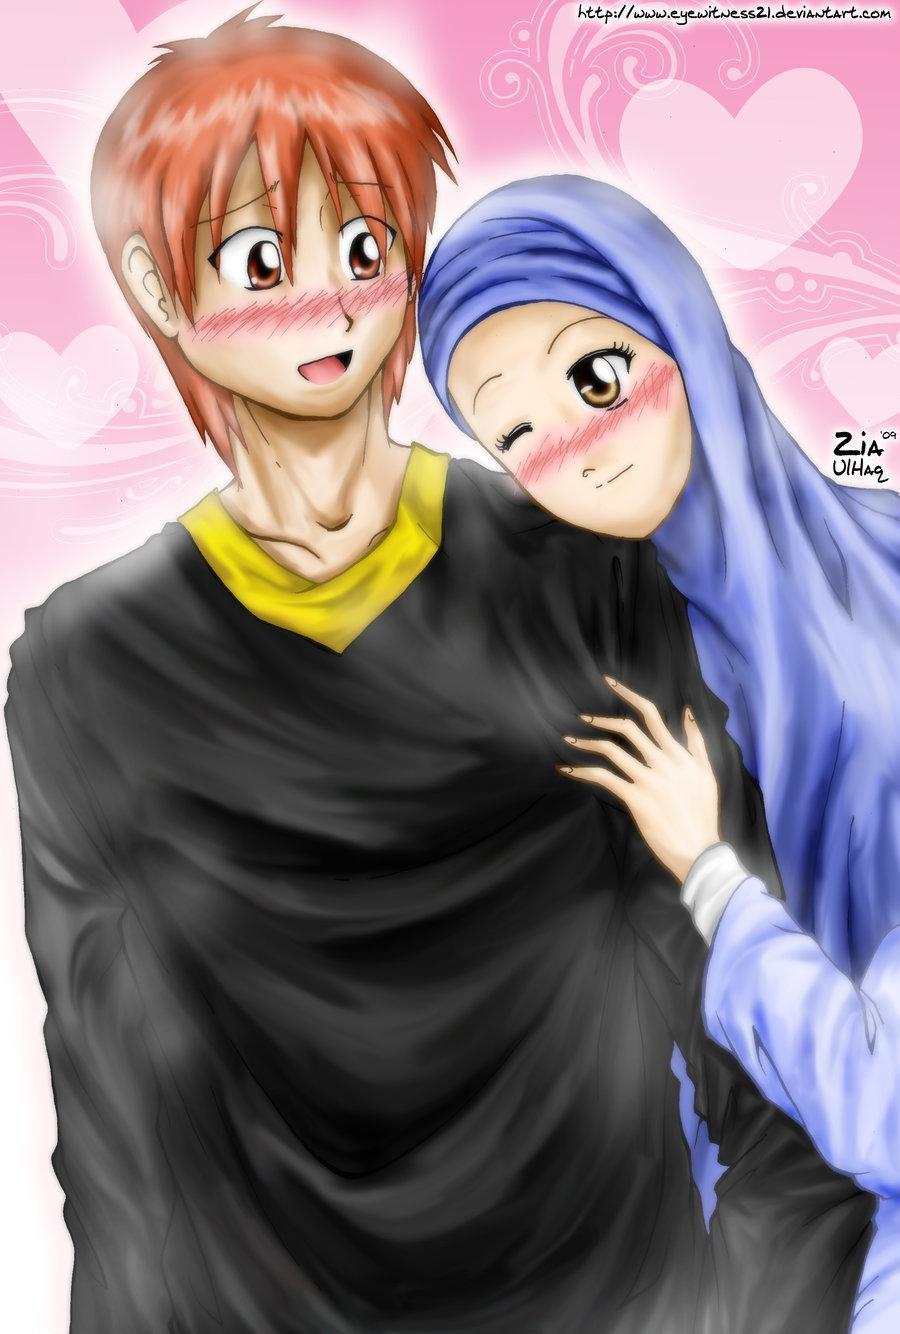 muslim couple cartoon wallpaper for Android